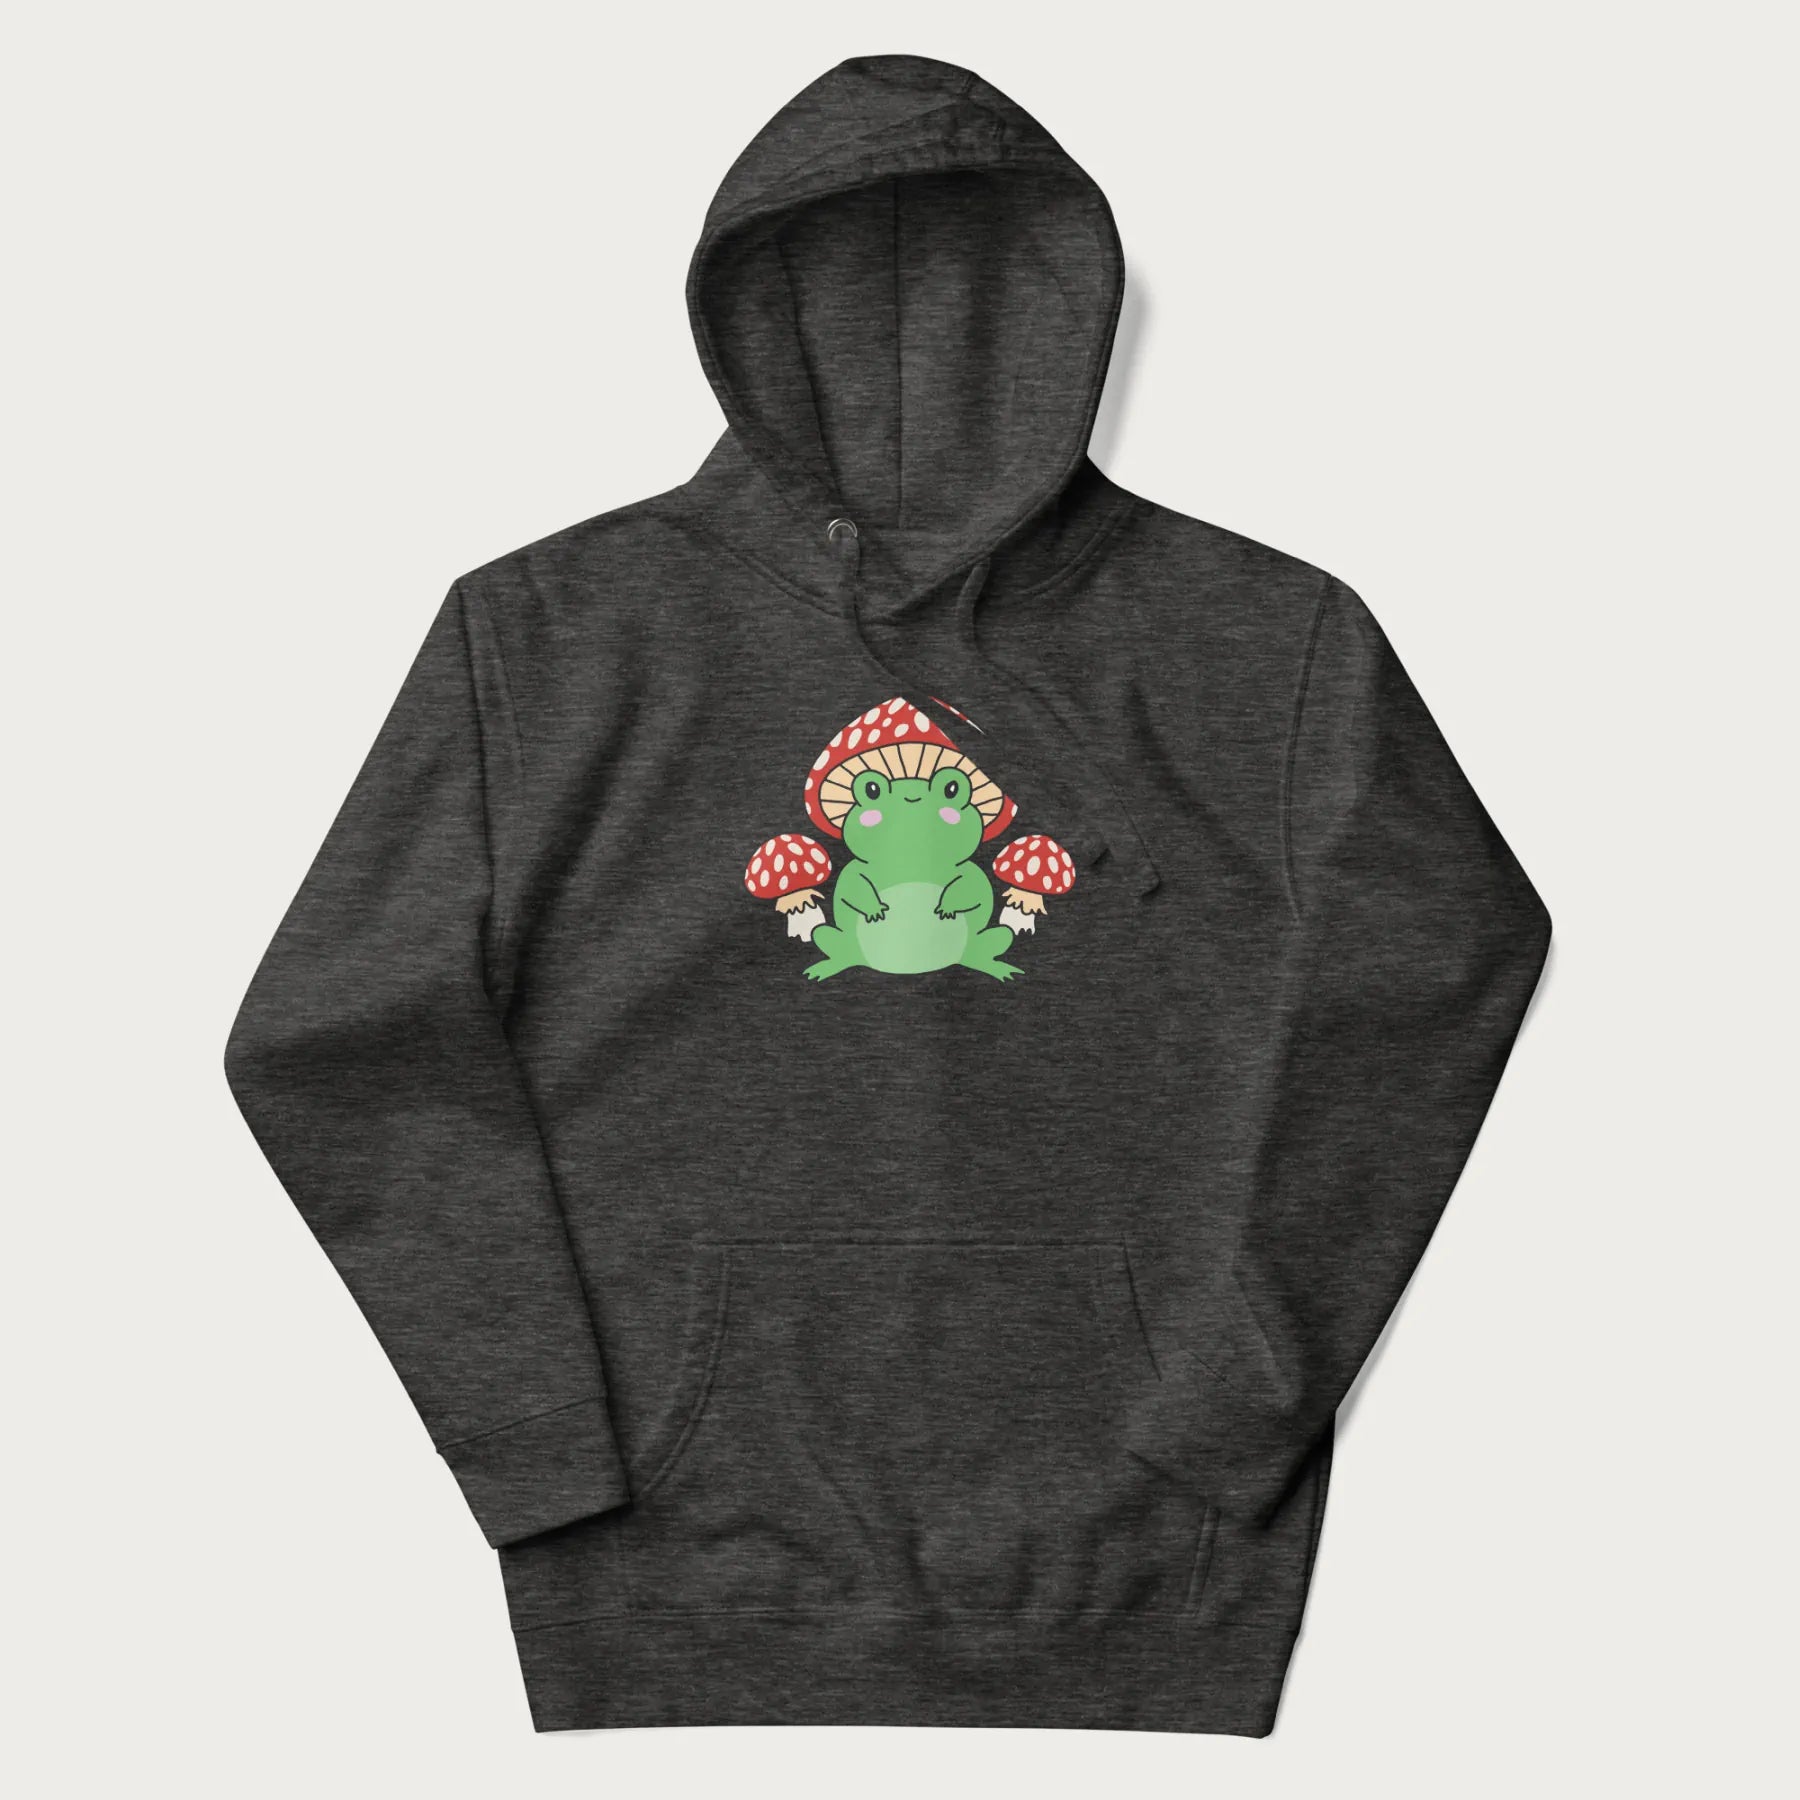 Folded white hoodie will illustration of a cute green frog with red and white mushrooms.